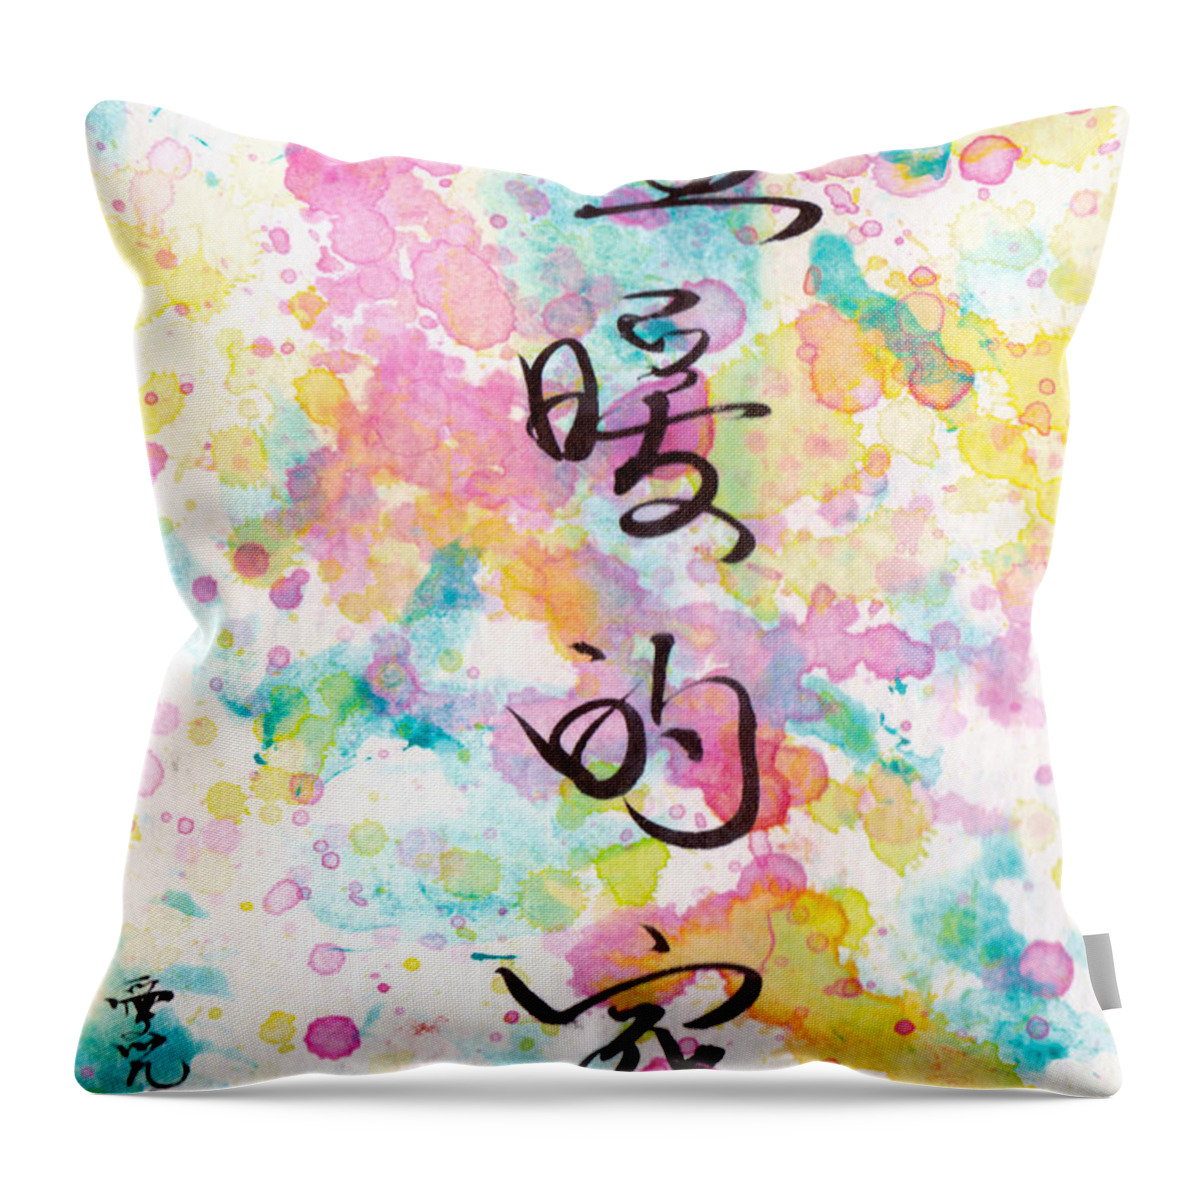 Watercolor Throw Pillow featuring the painting A Warm Home by Oiyee At Oystudio